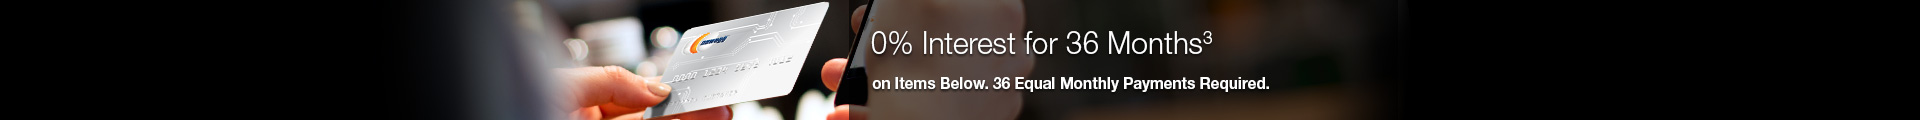 0% Interest for 36 Months